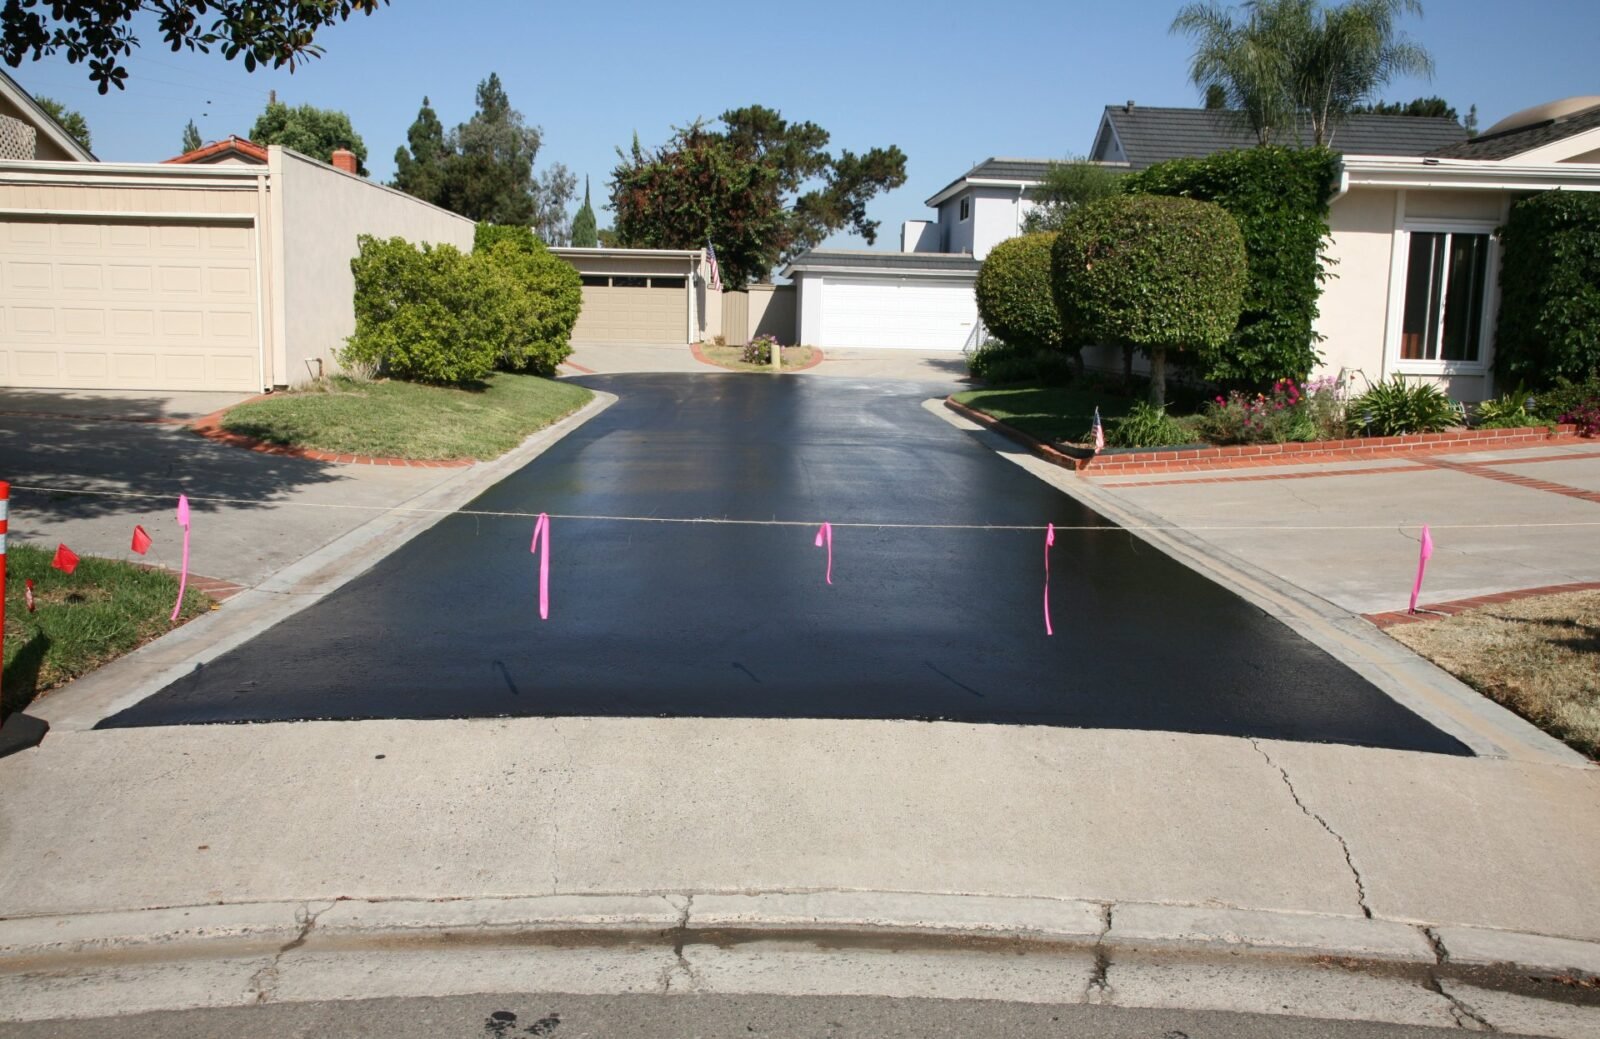 A residential driveway freshly paved with black asphalt by Palm Beach Asphalt has pink tape strung across its entrance. Two homes with green hedges and white garages flank the driveway. In the background, a clear blue sky and various trees are visible, reminiscent of Riviera Beach FL.